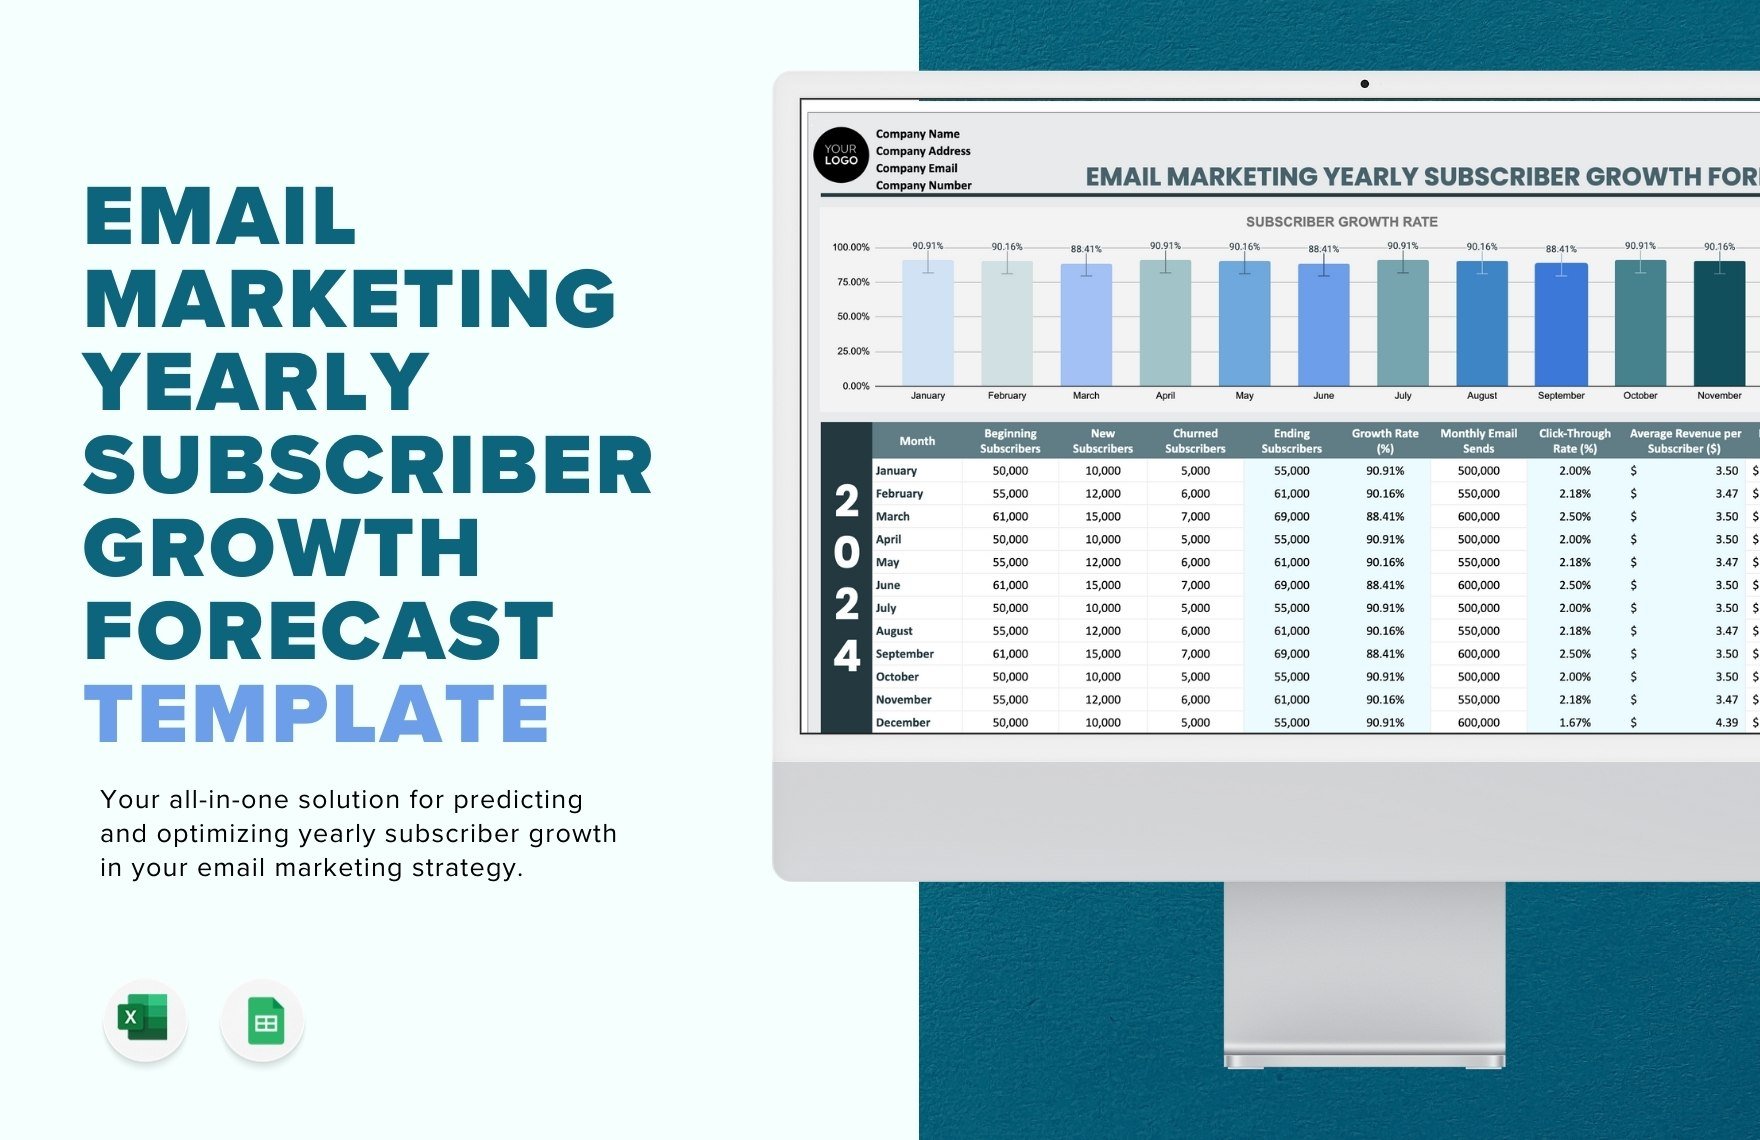 Email Marketing Yearly Subscriber Growth Forecast Template